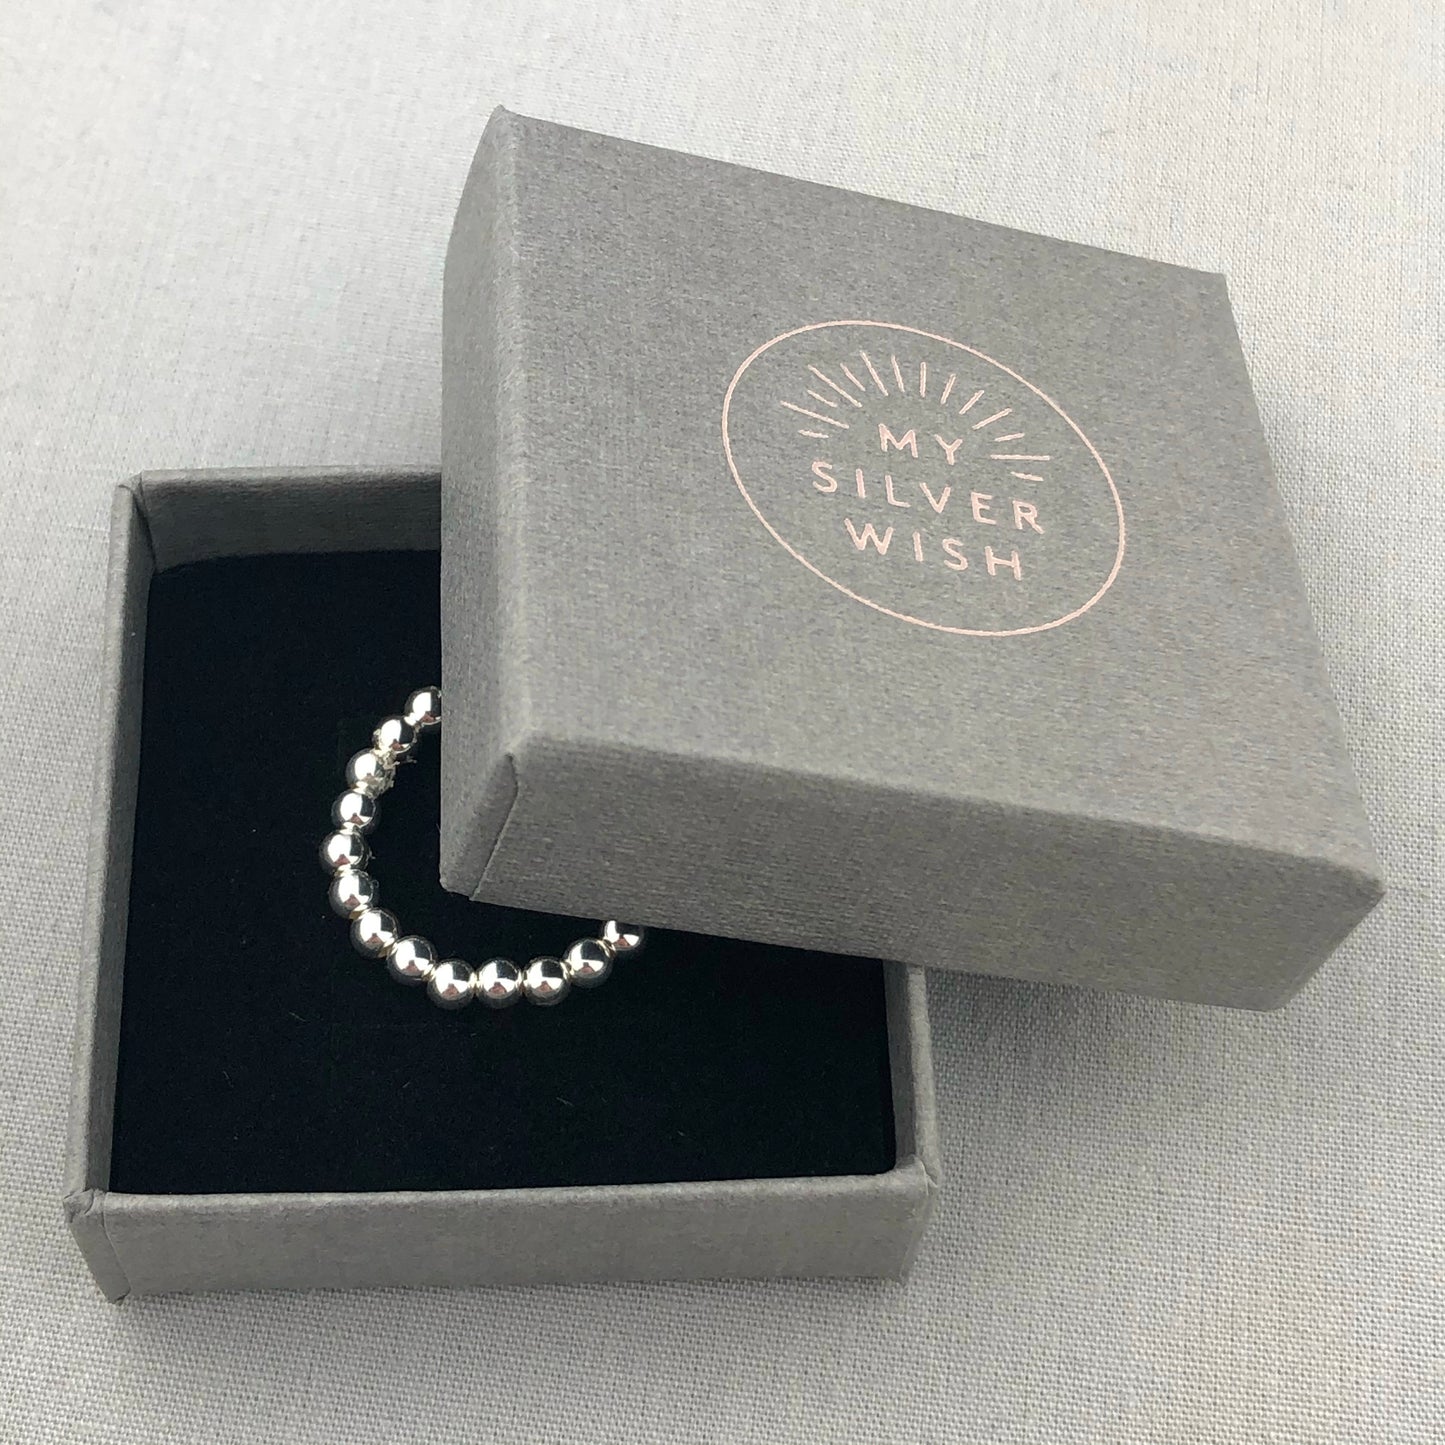 My Silver Wish Gift Box with Silver Stacking Charm Ring inside